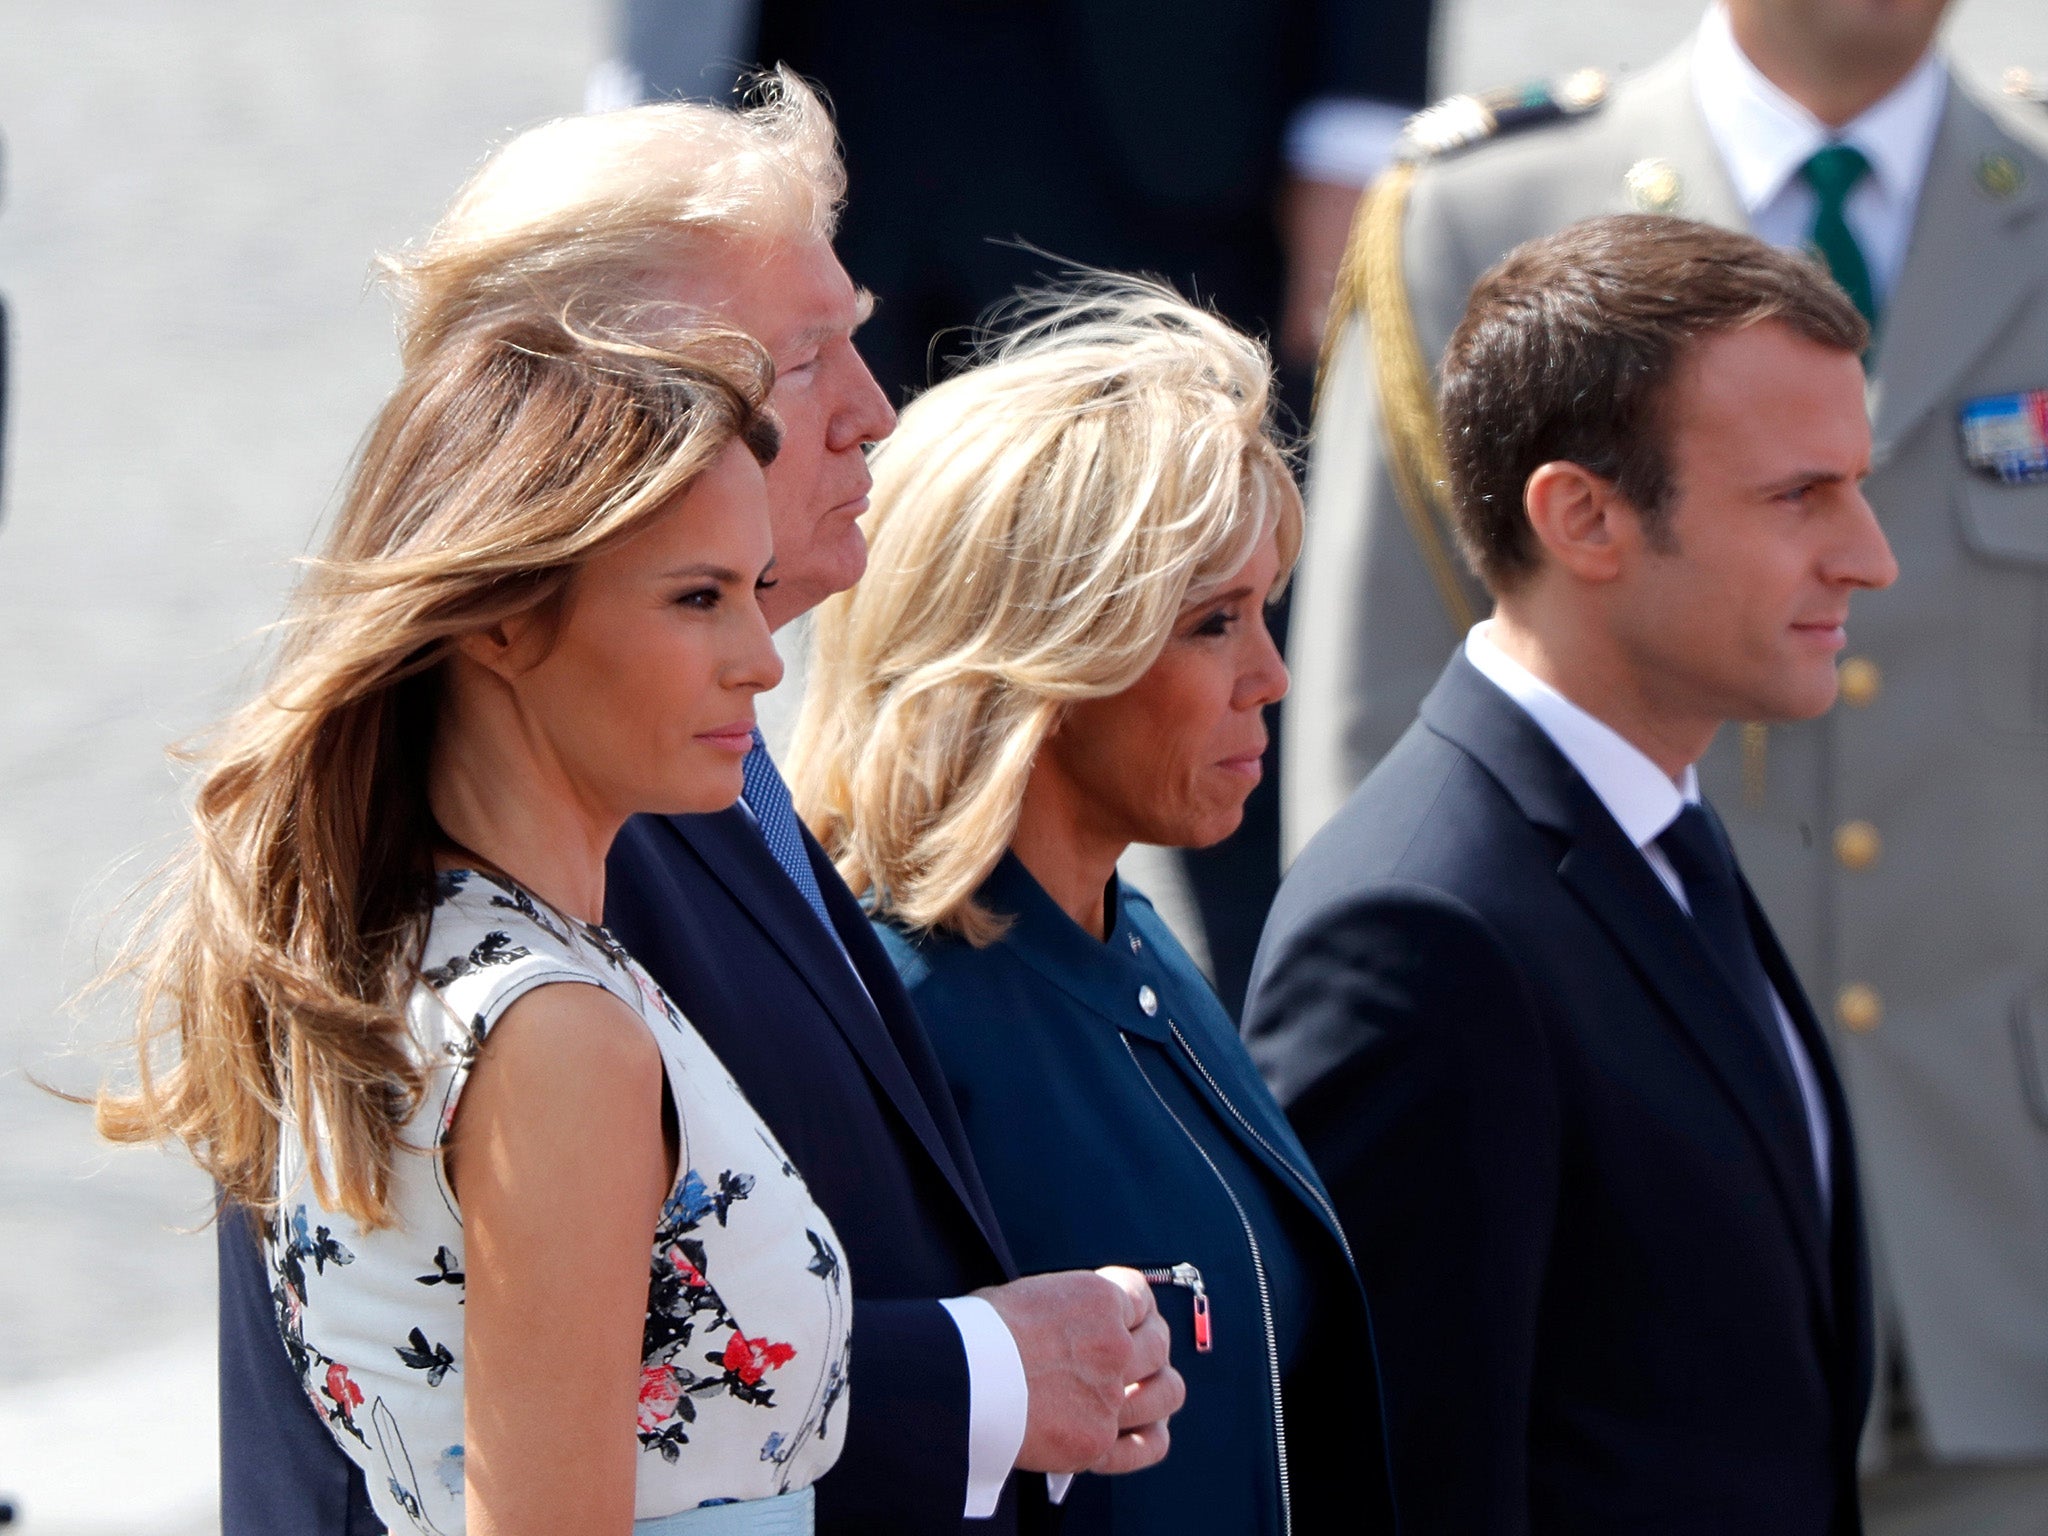 Donald and Melania Trump in France with Emmanuel Macron and his wife, Brigitte